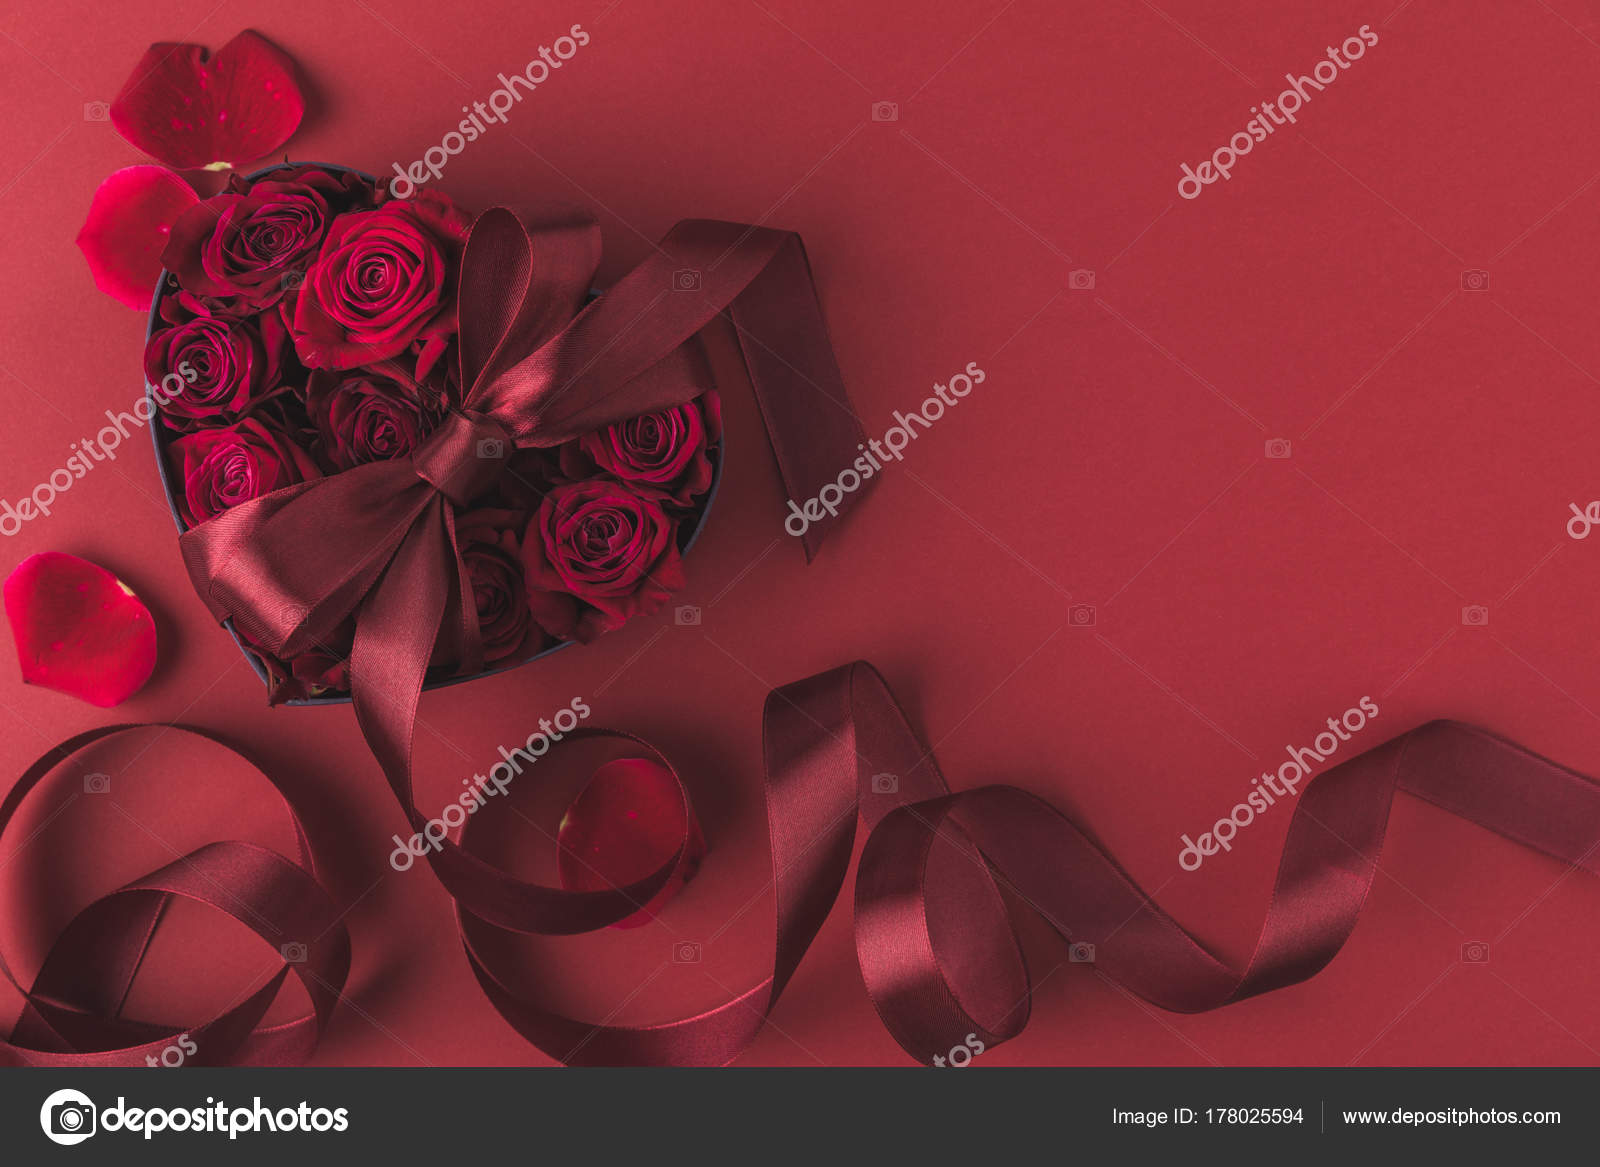 Flat Lay With Bouquet Of Roses Ribbon And Envelope Isolated On